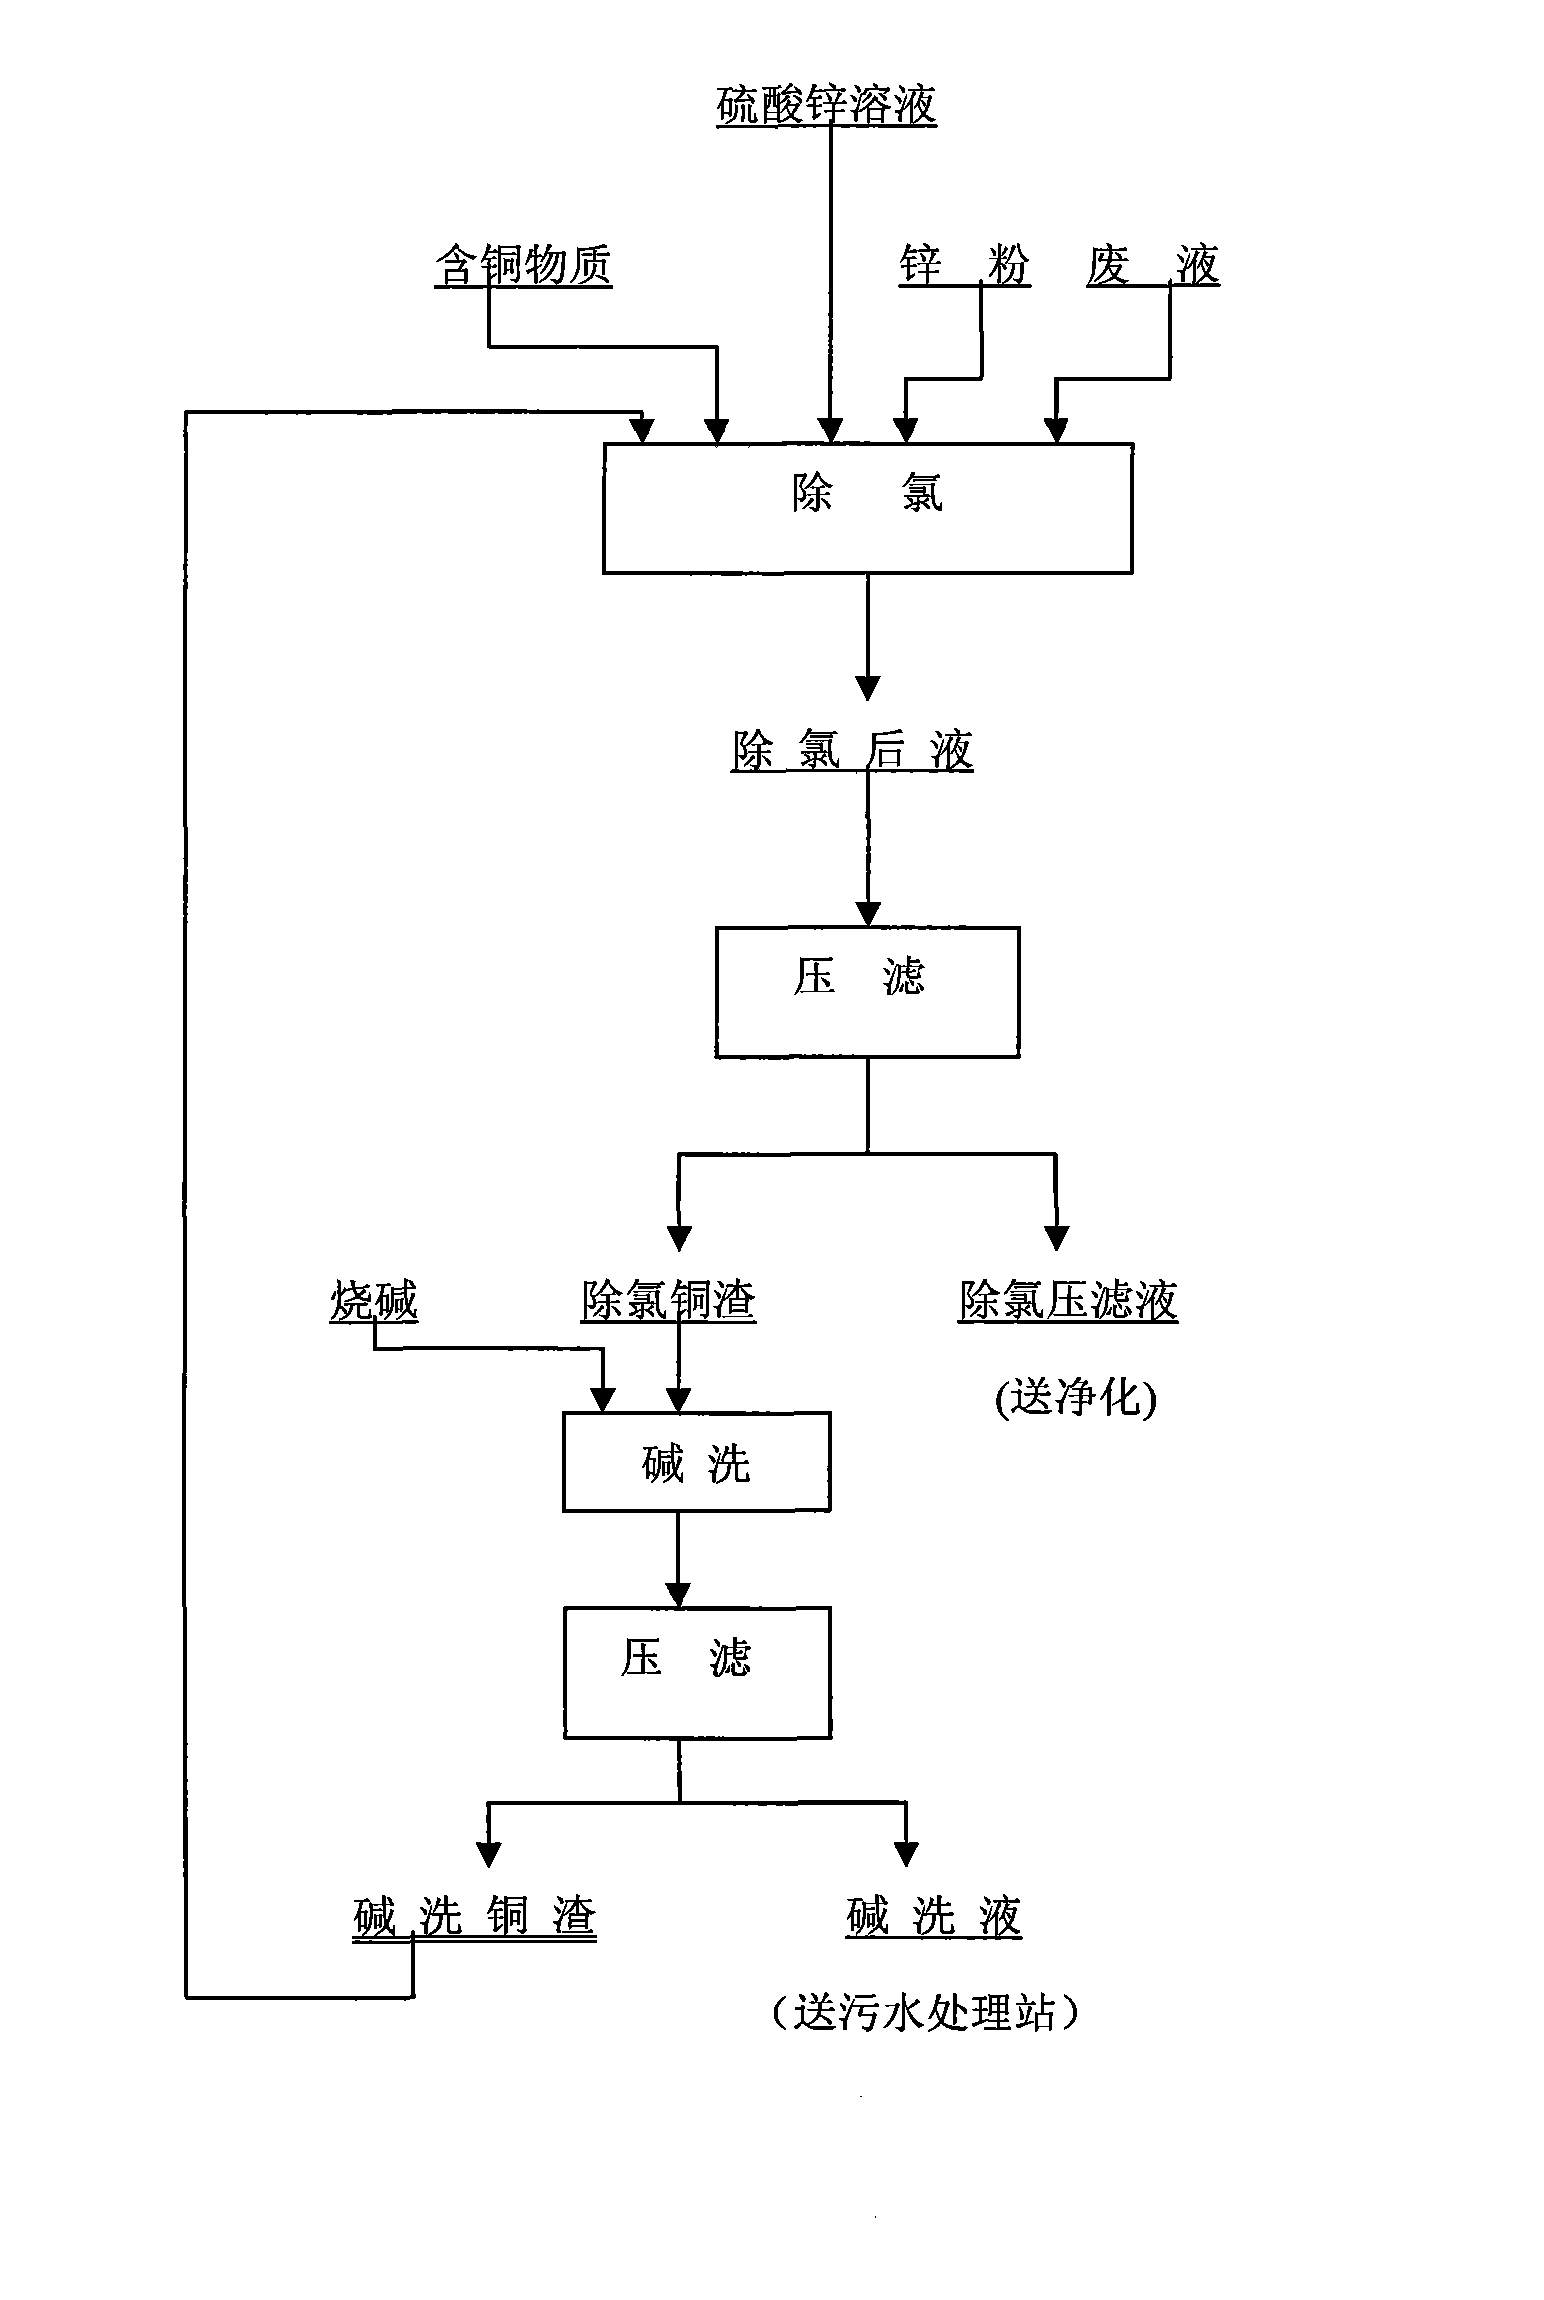 Method for circularly removing chlorine in zinc sulphate solution by copper slag